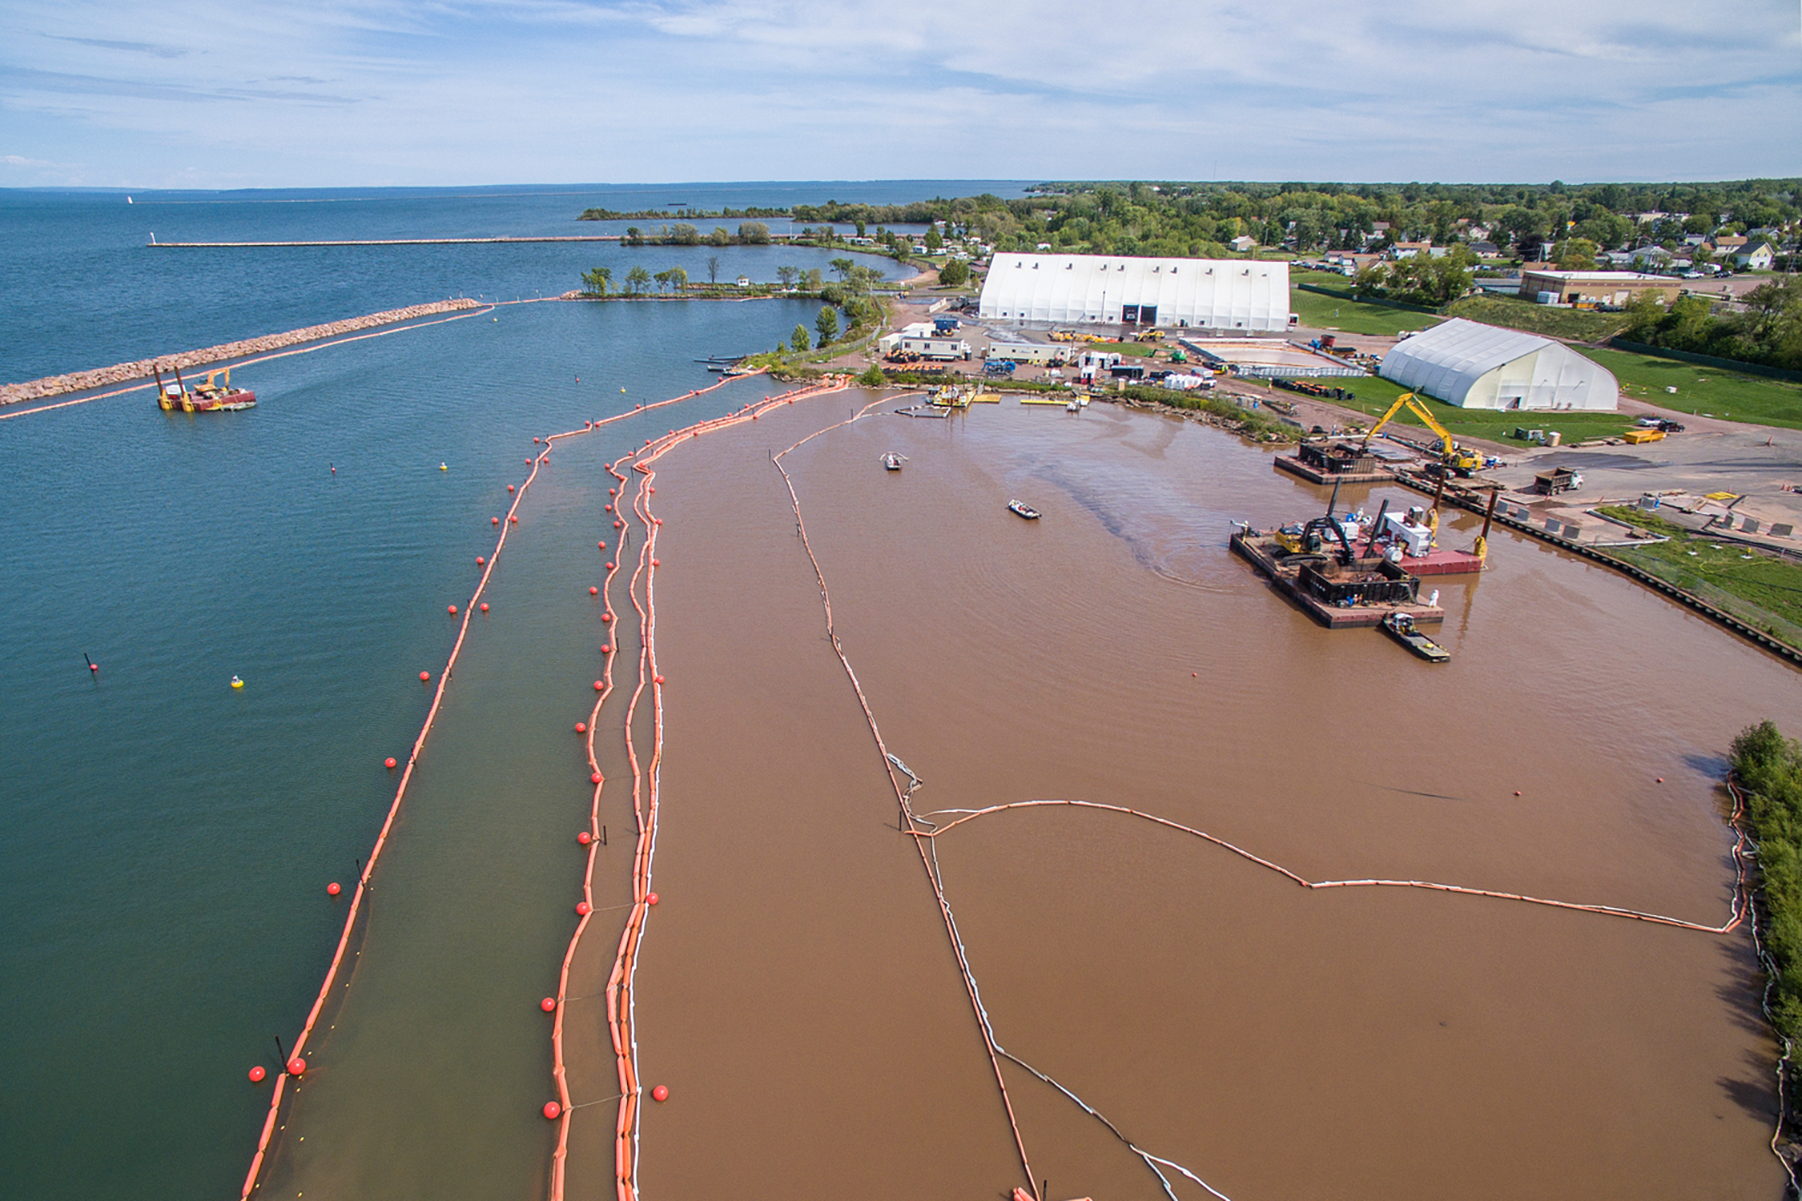 Challenge Accepted: The Lake Superior Restoration Project that “Couldn’t Be Done”